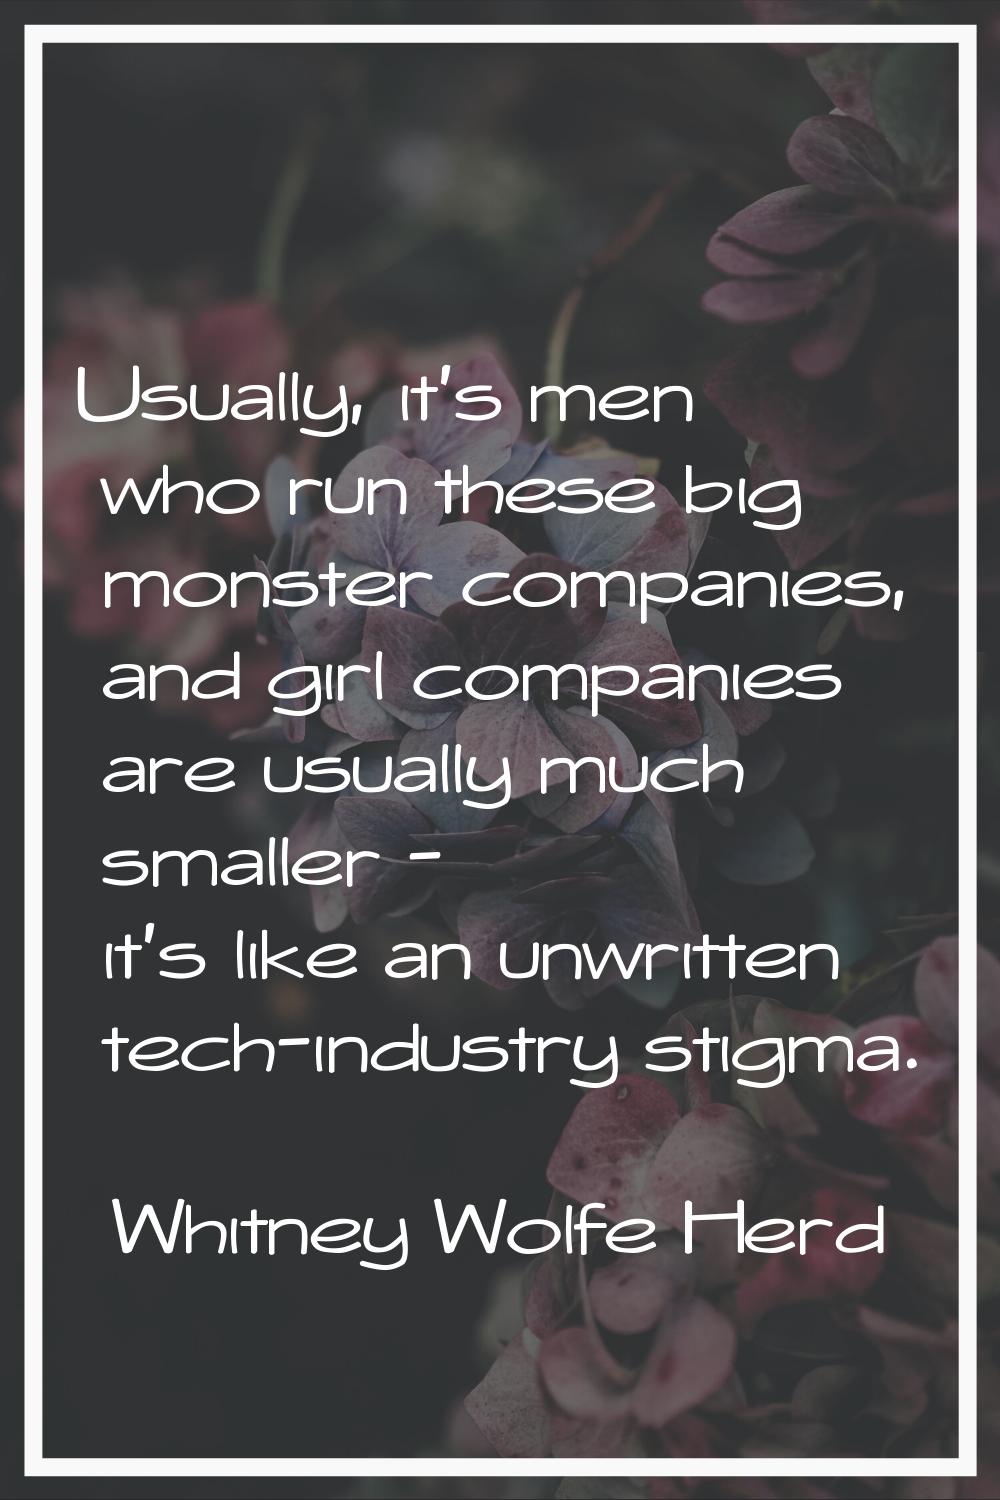 Usually, it's men who run these big monster companies, and girl companies are usually much smaller 